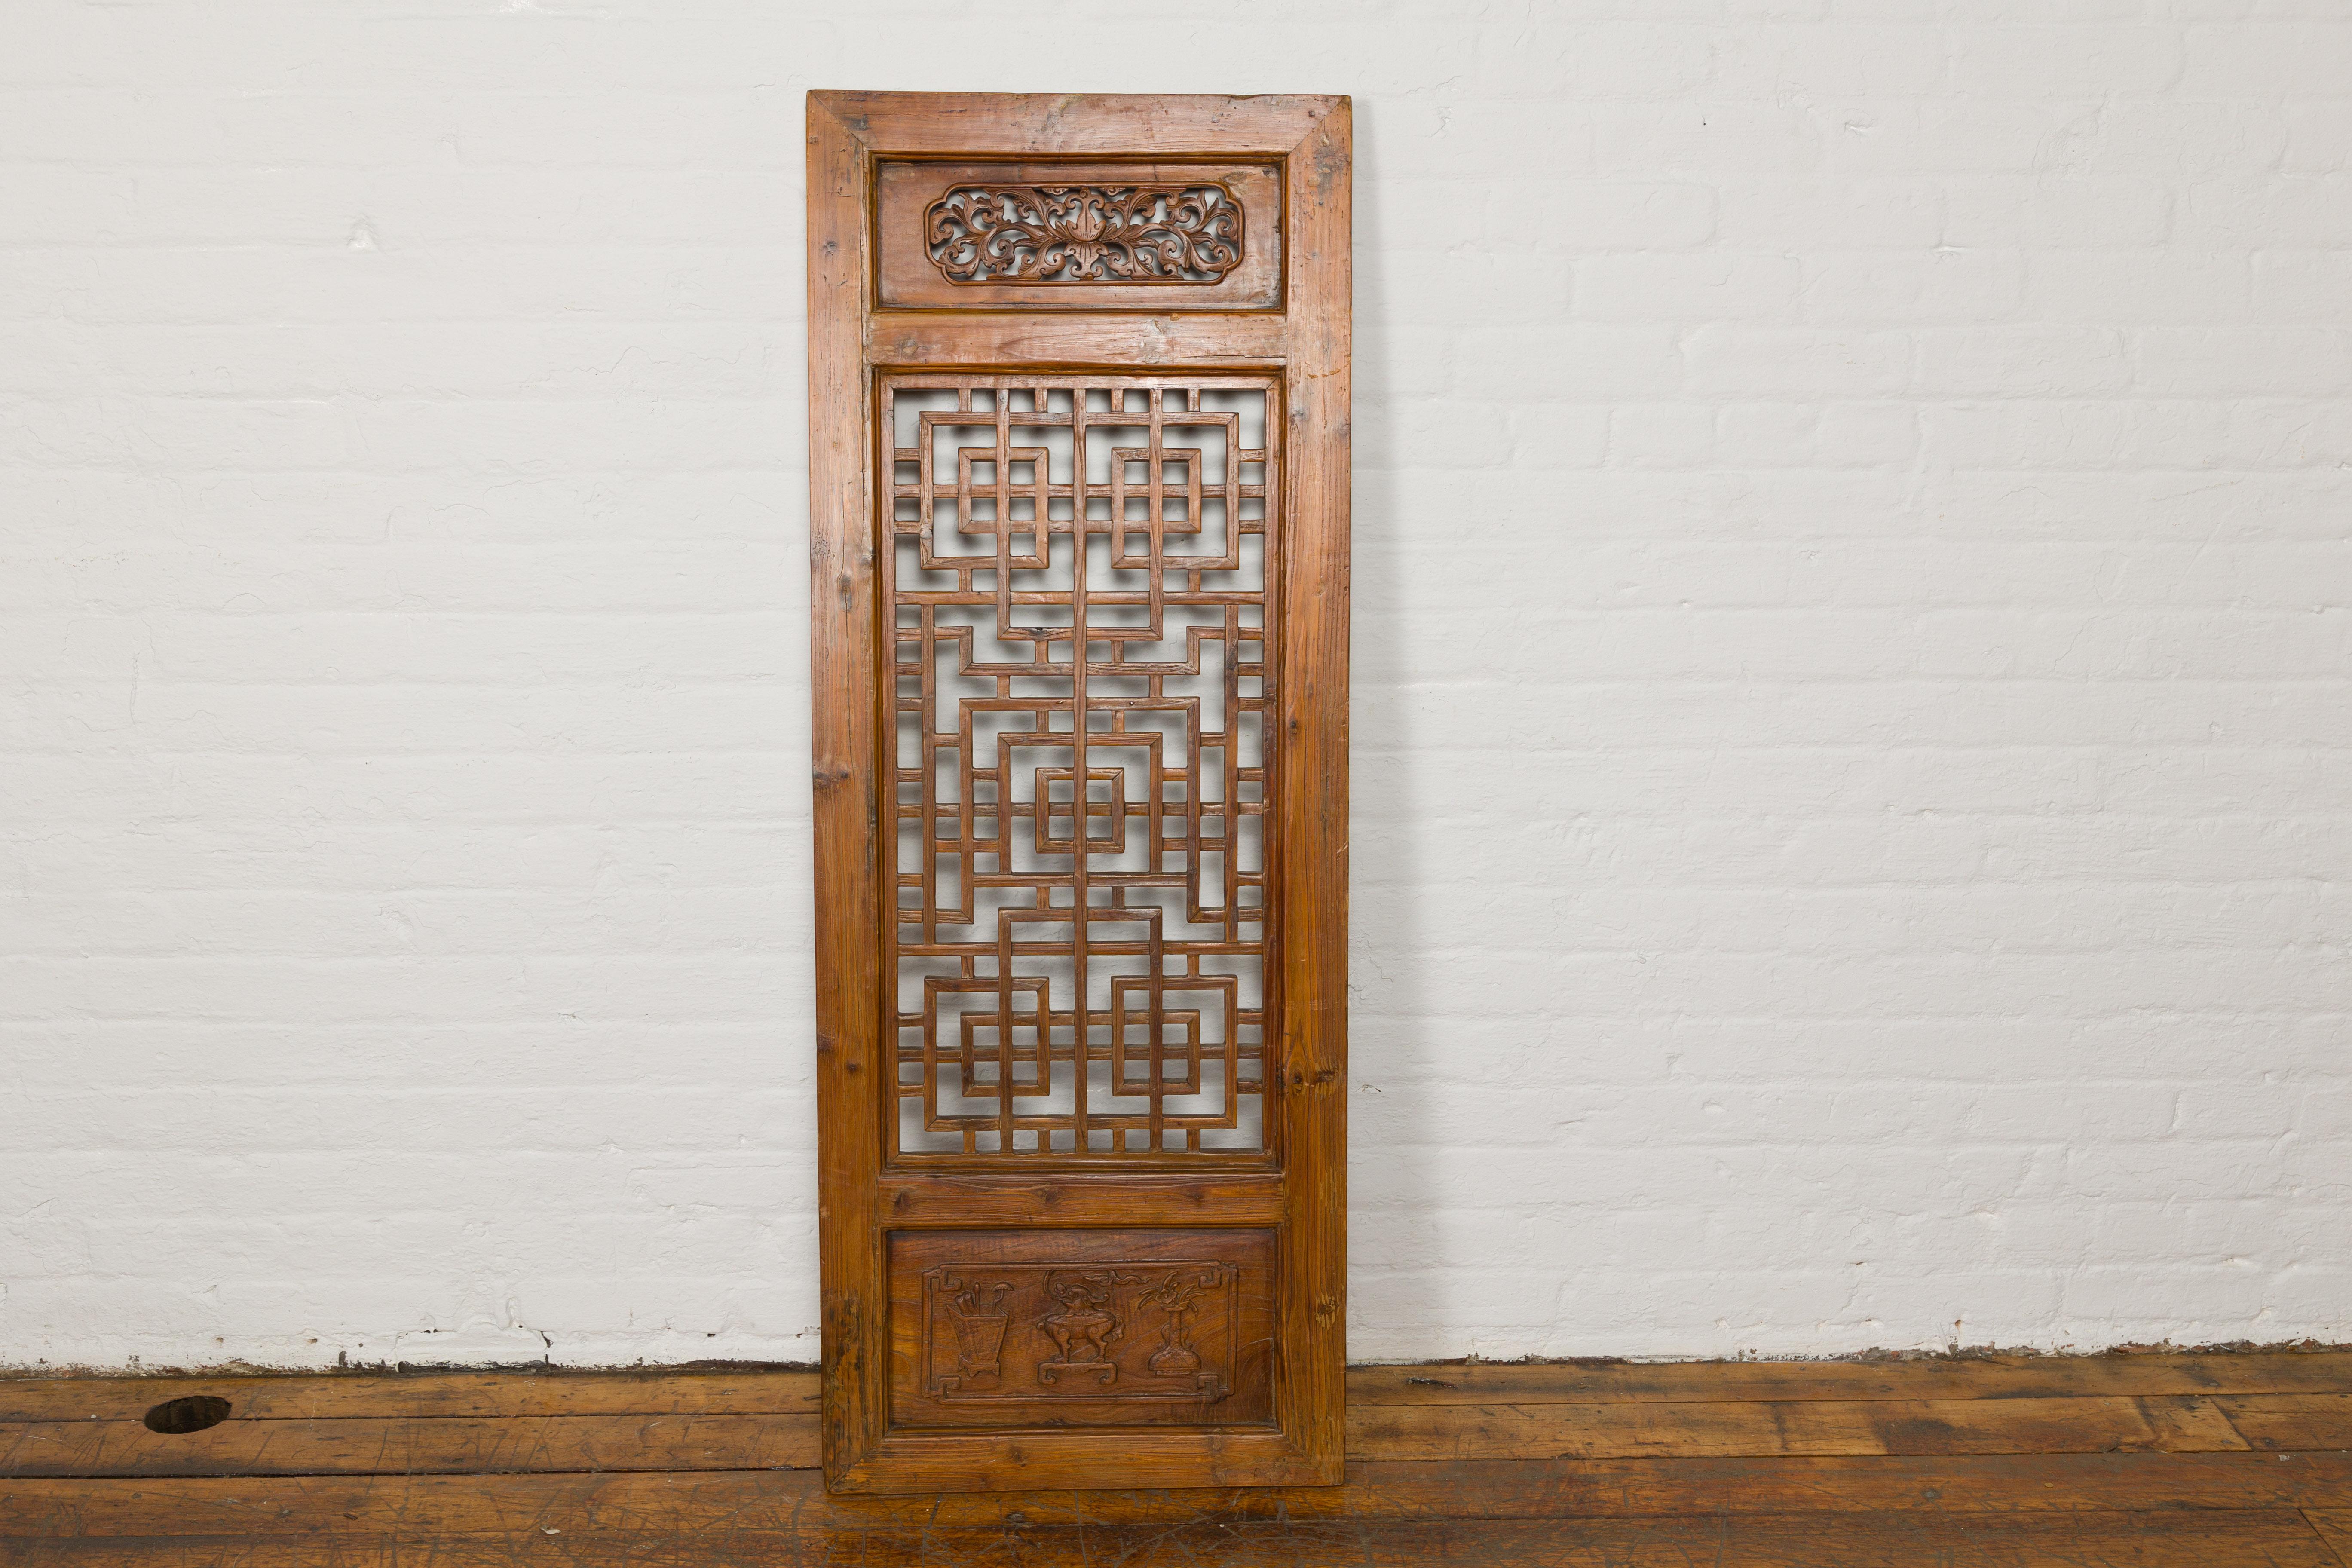 Chinese Qing Dynasty 19th Century Fretwork Screen with Carved Scrolling Motifs For Sale 12